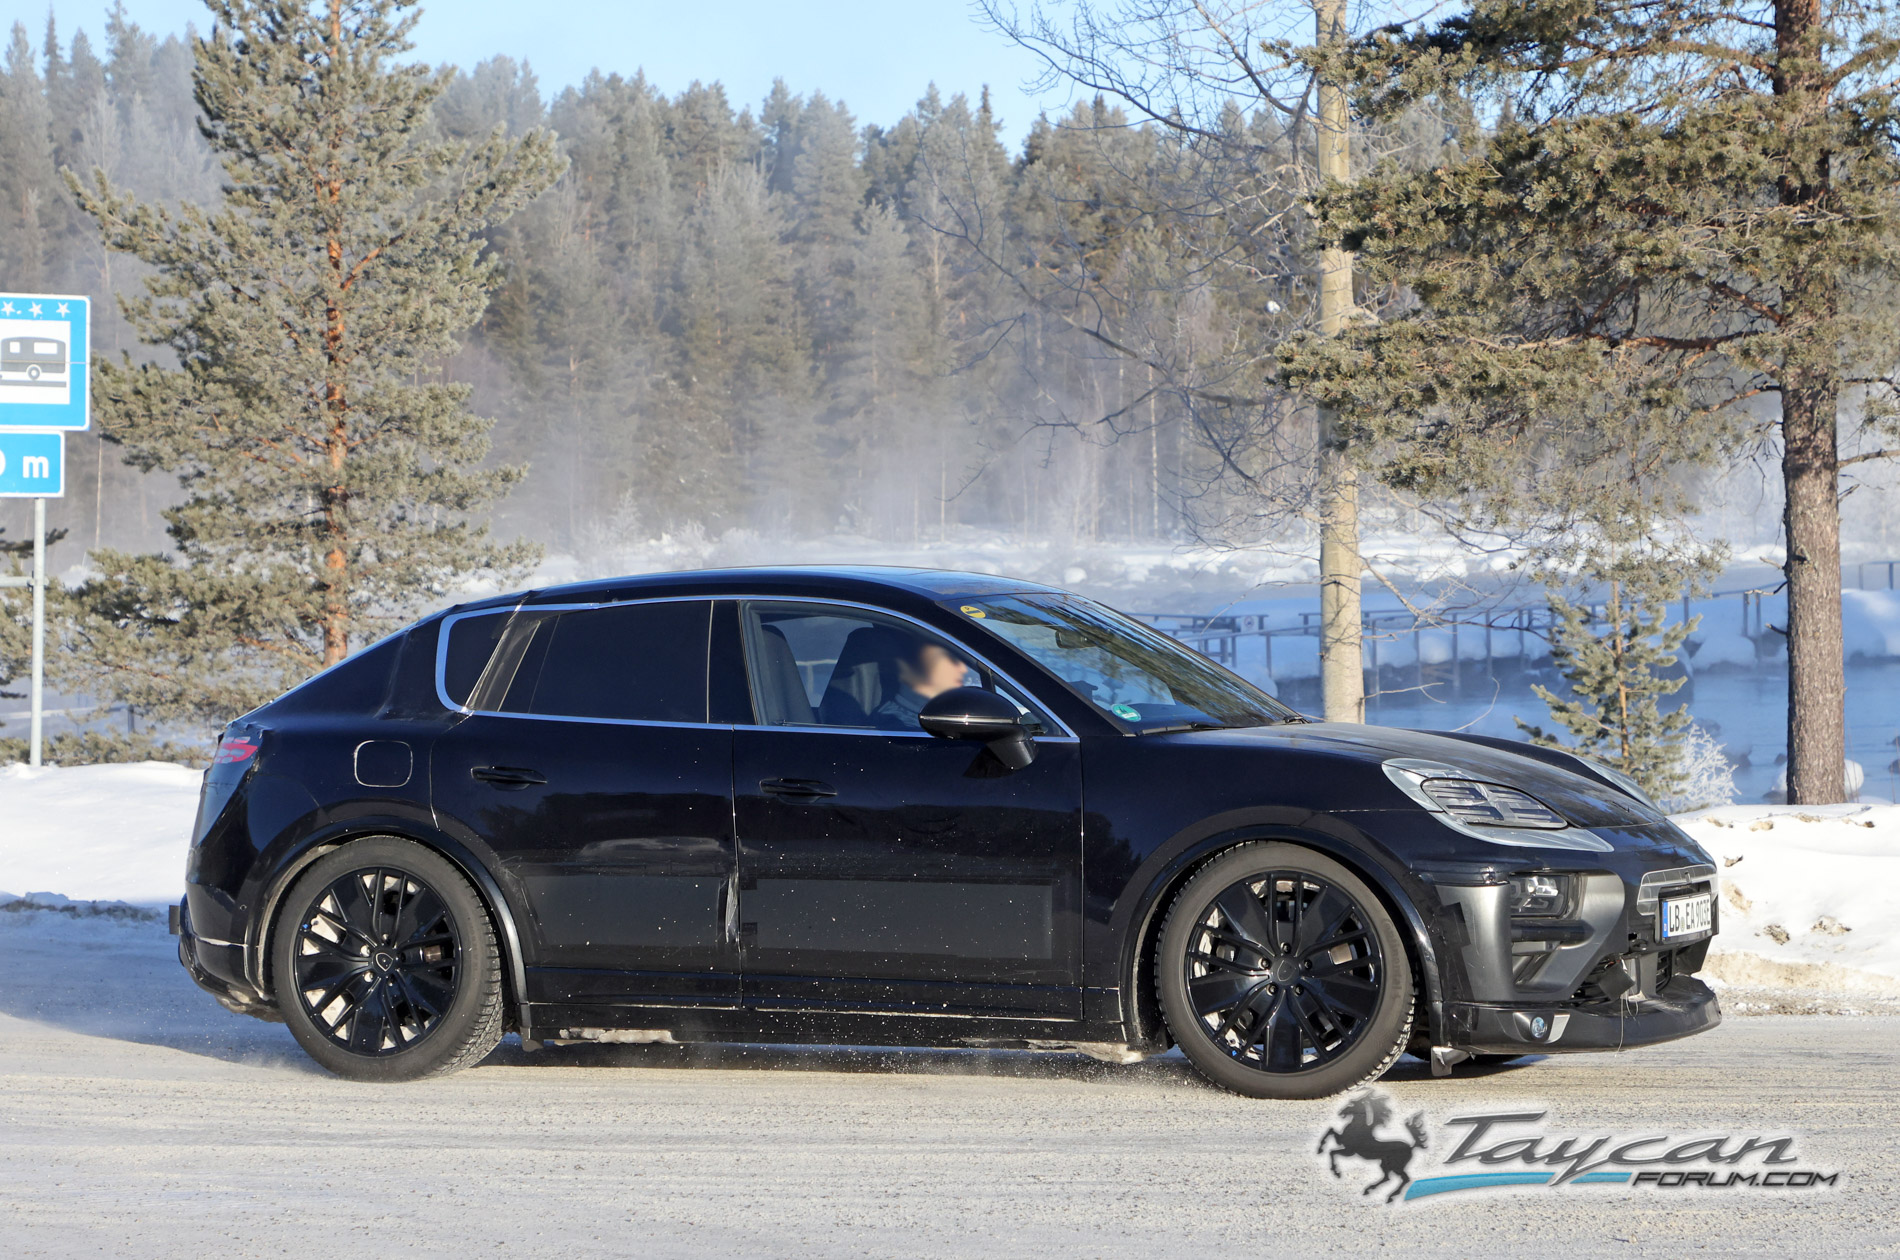 Macan EV Macan EV Interior Spied Uncovered! + Latest Cold Climate Testing Photos Porsche Macan 13